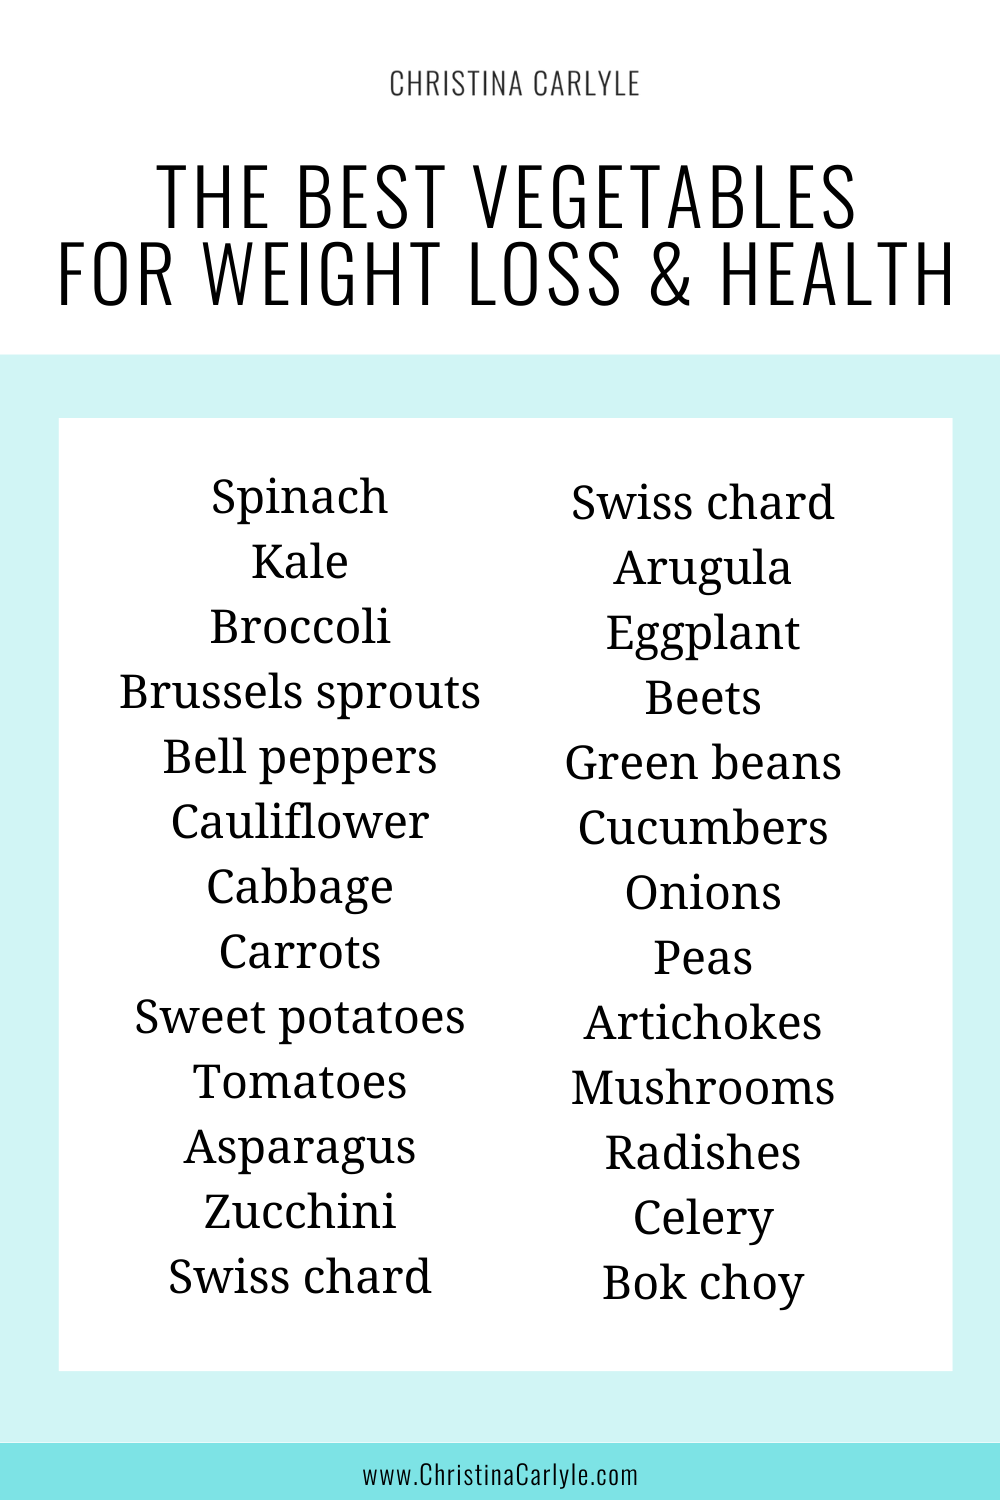 a list of 25 vegetables and text that says the Best Vegetables for Weight Loss and Health